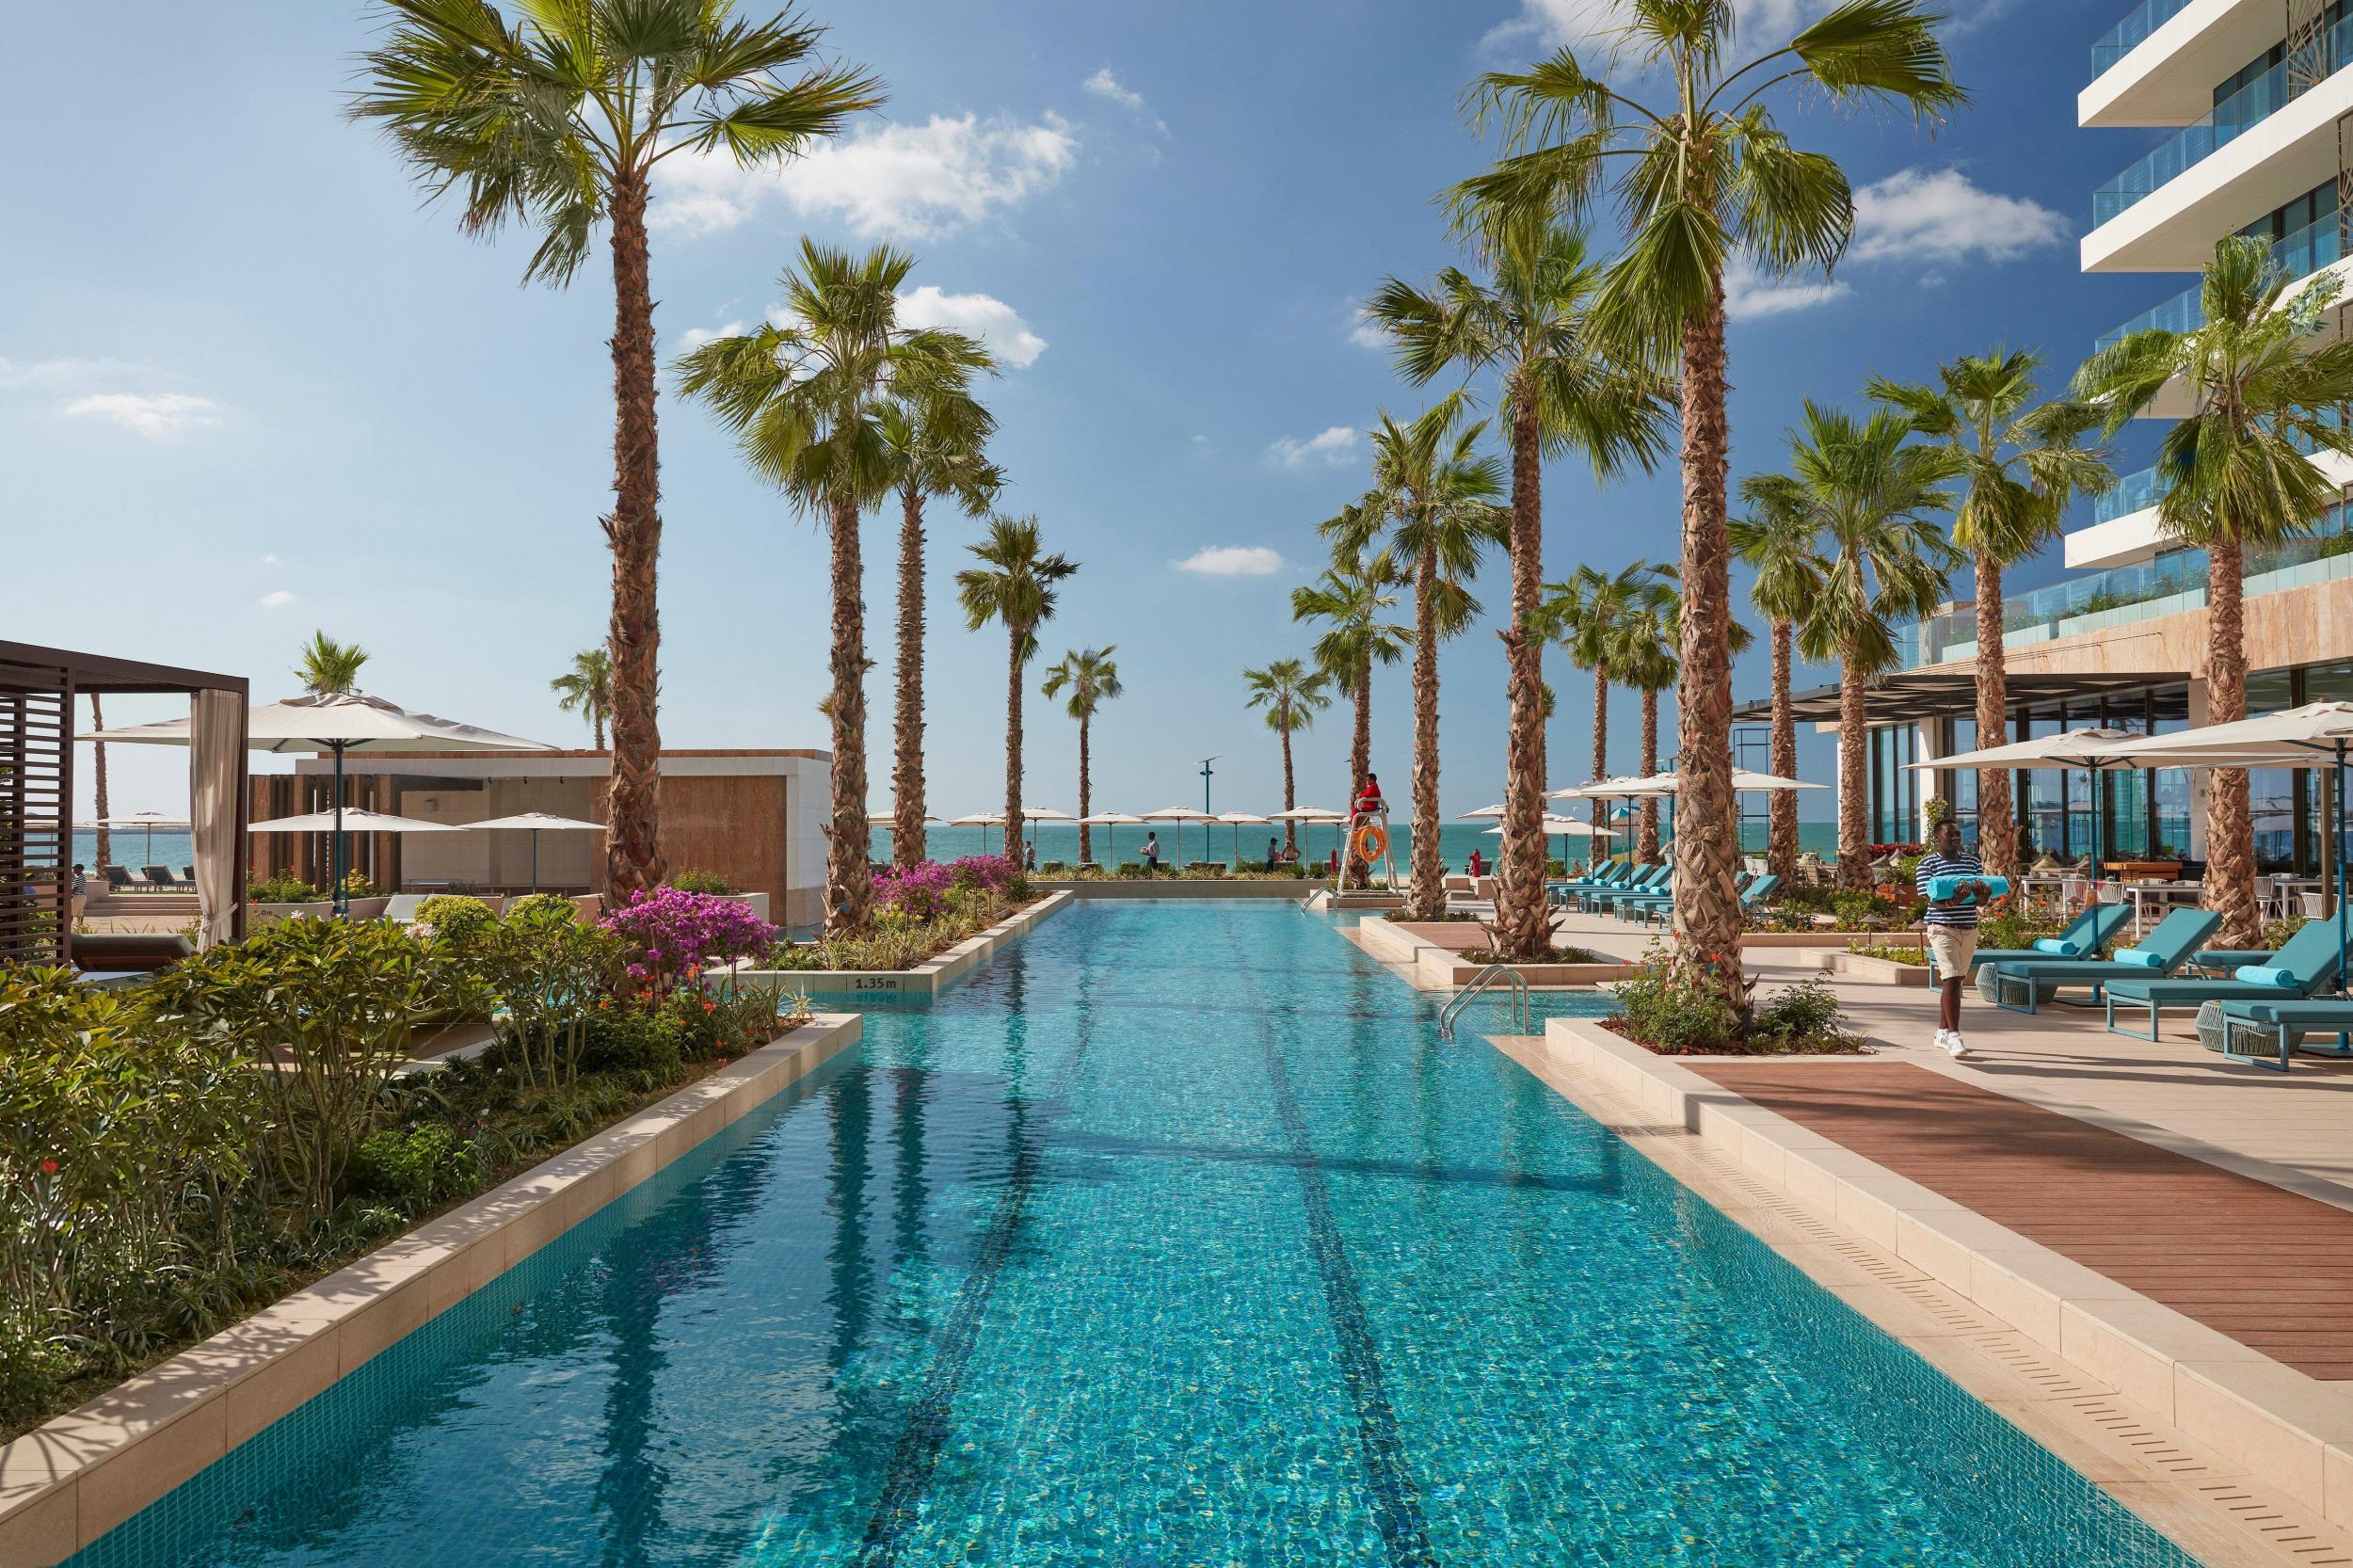 The pool at the new Mandarin Oriental